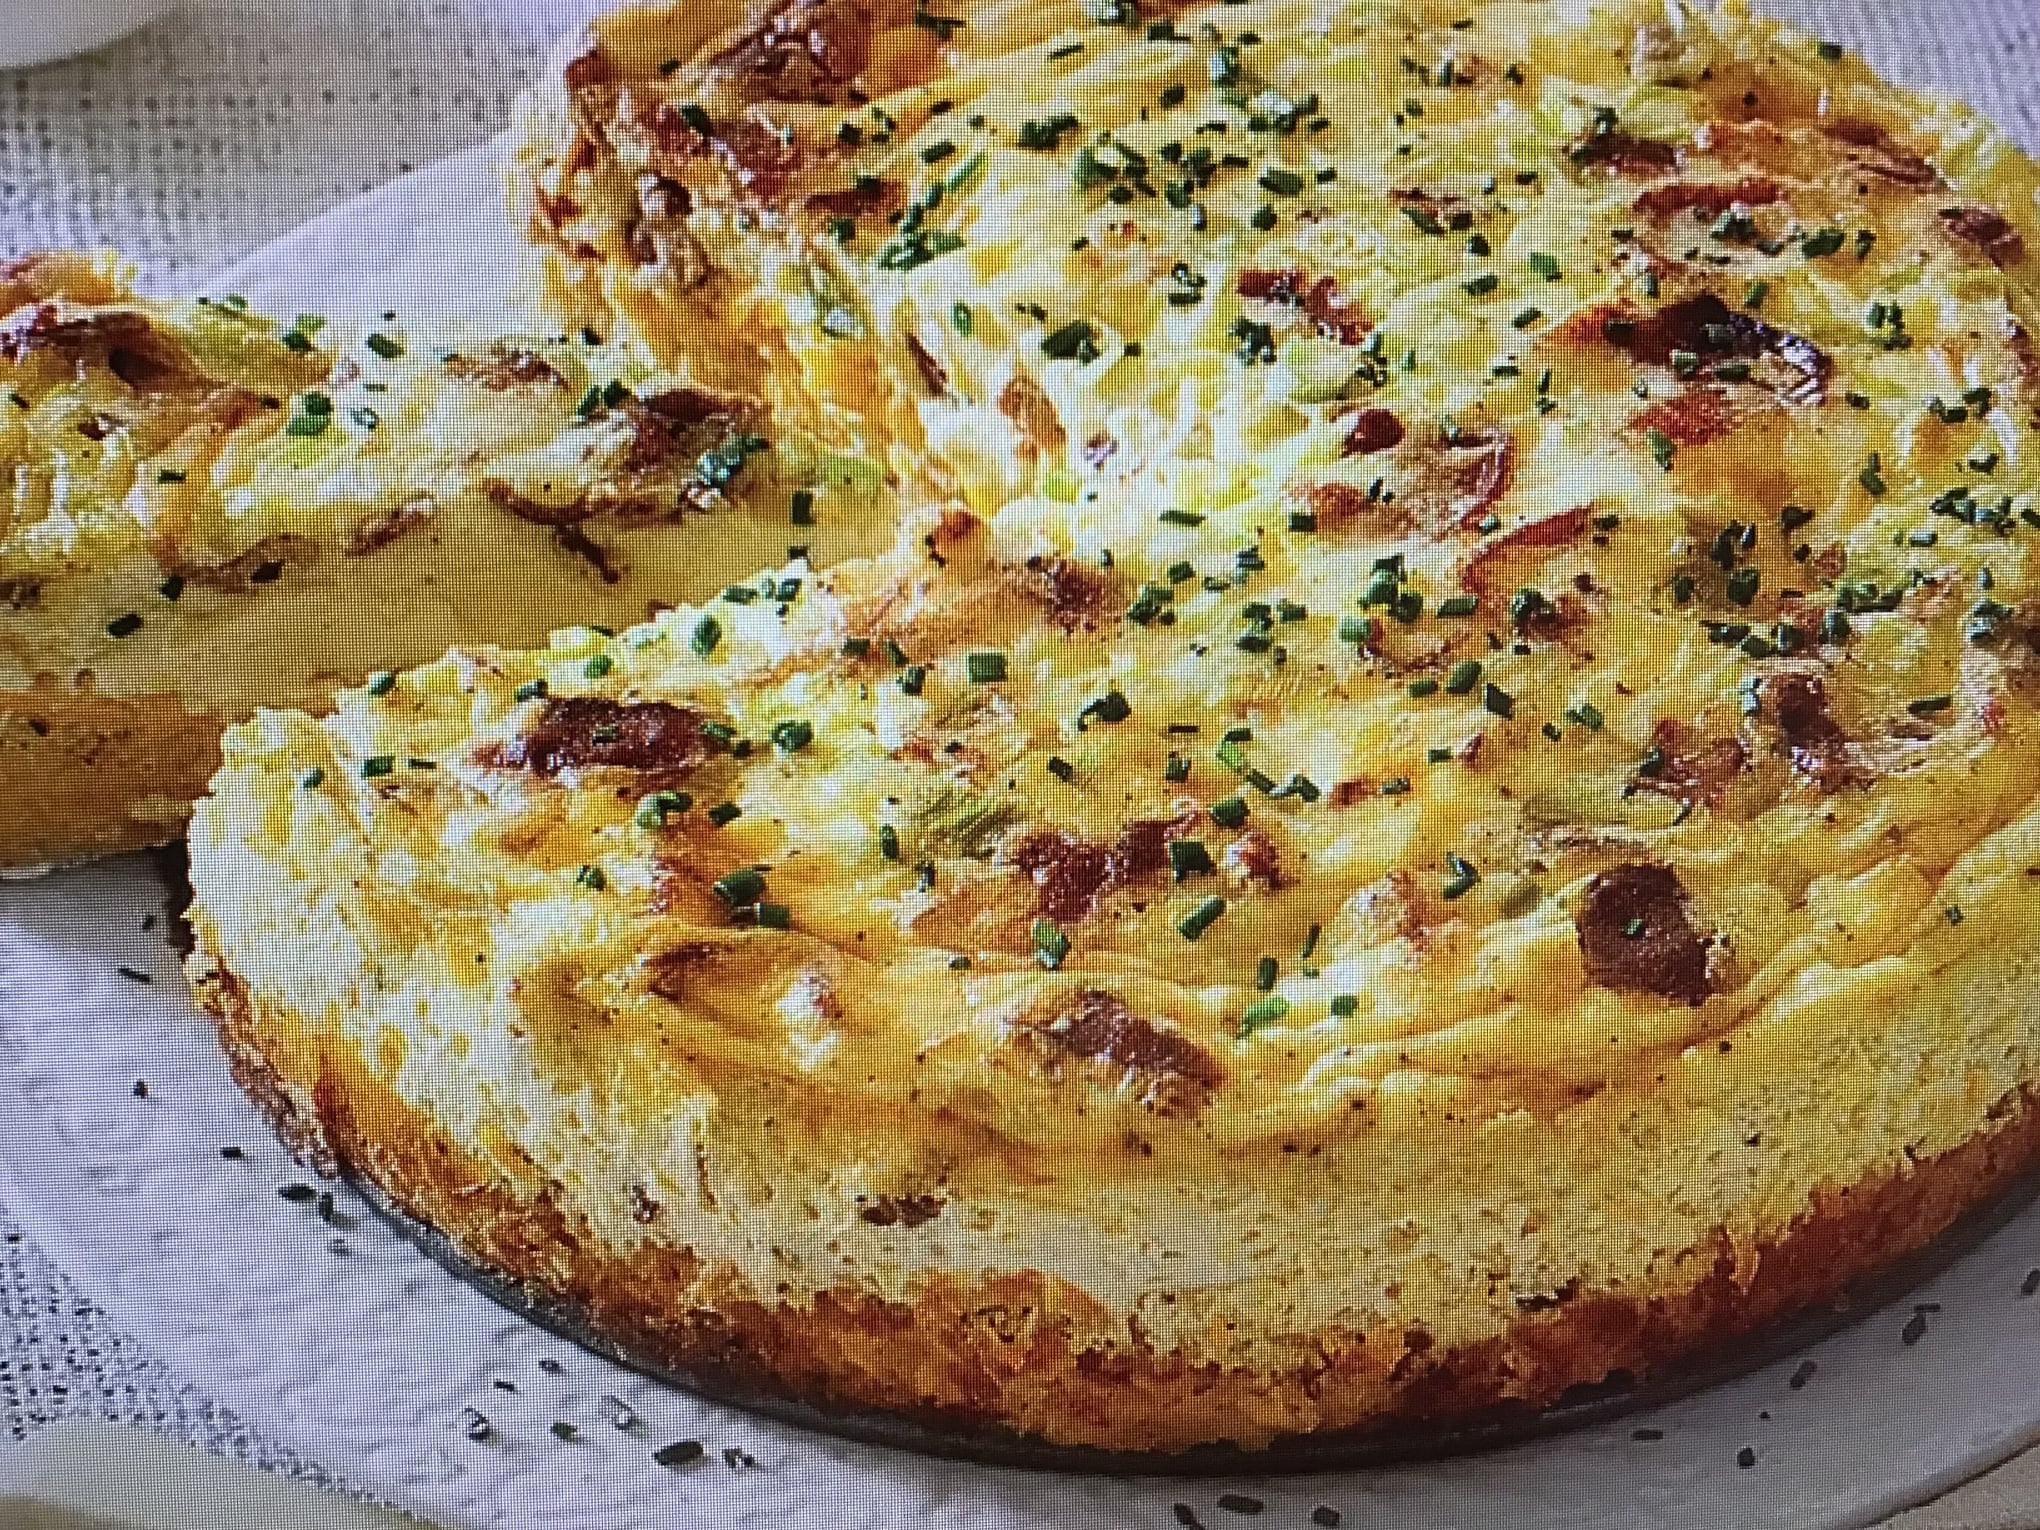 Bacony Cheddar Grits Quiche